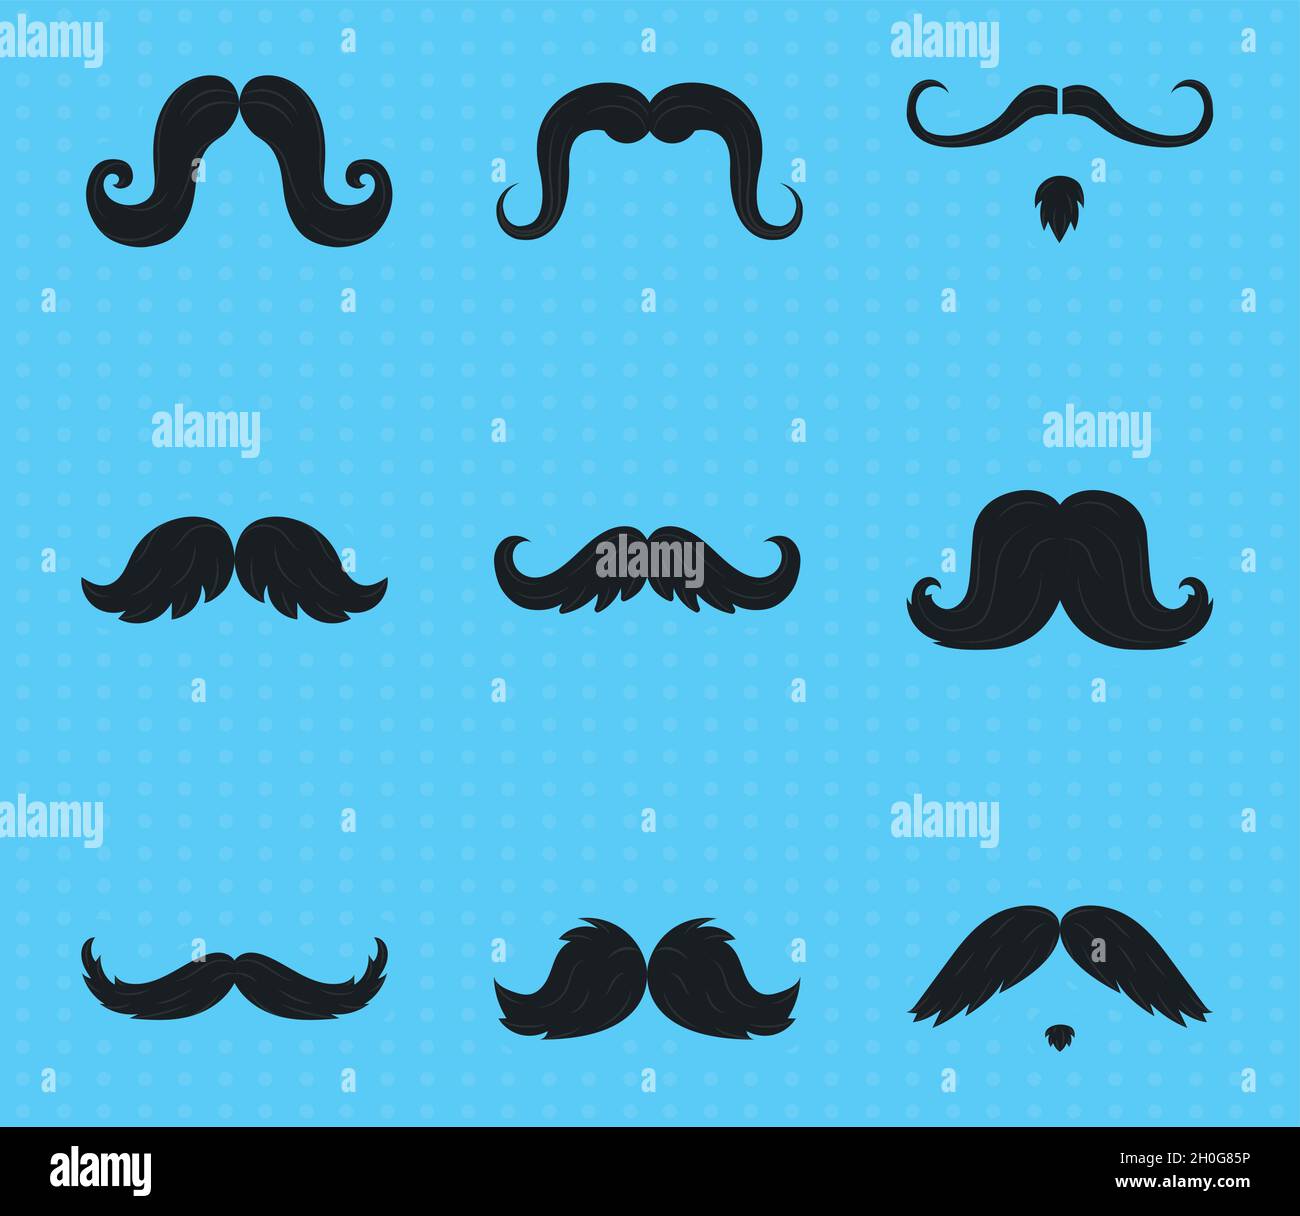 movember backgrounds